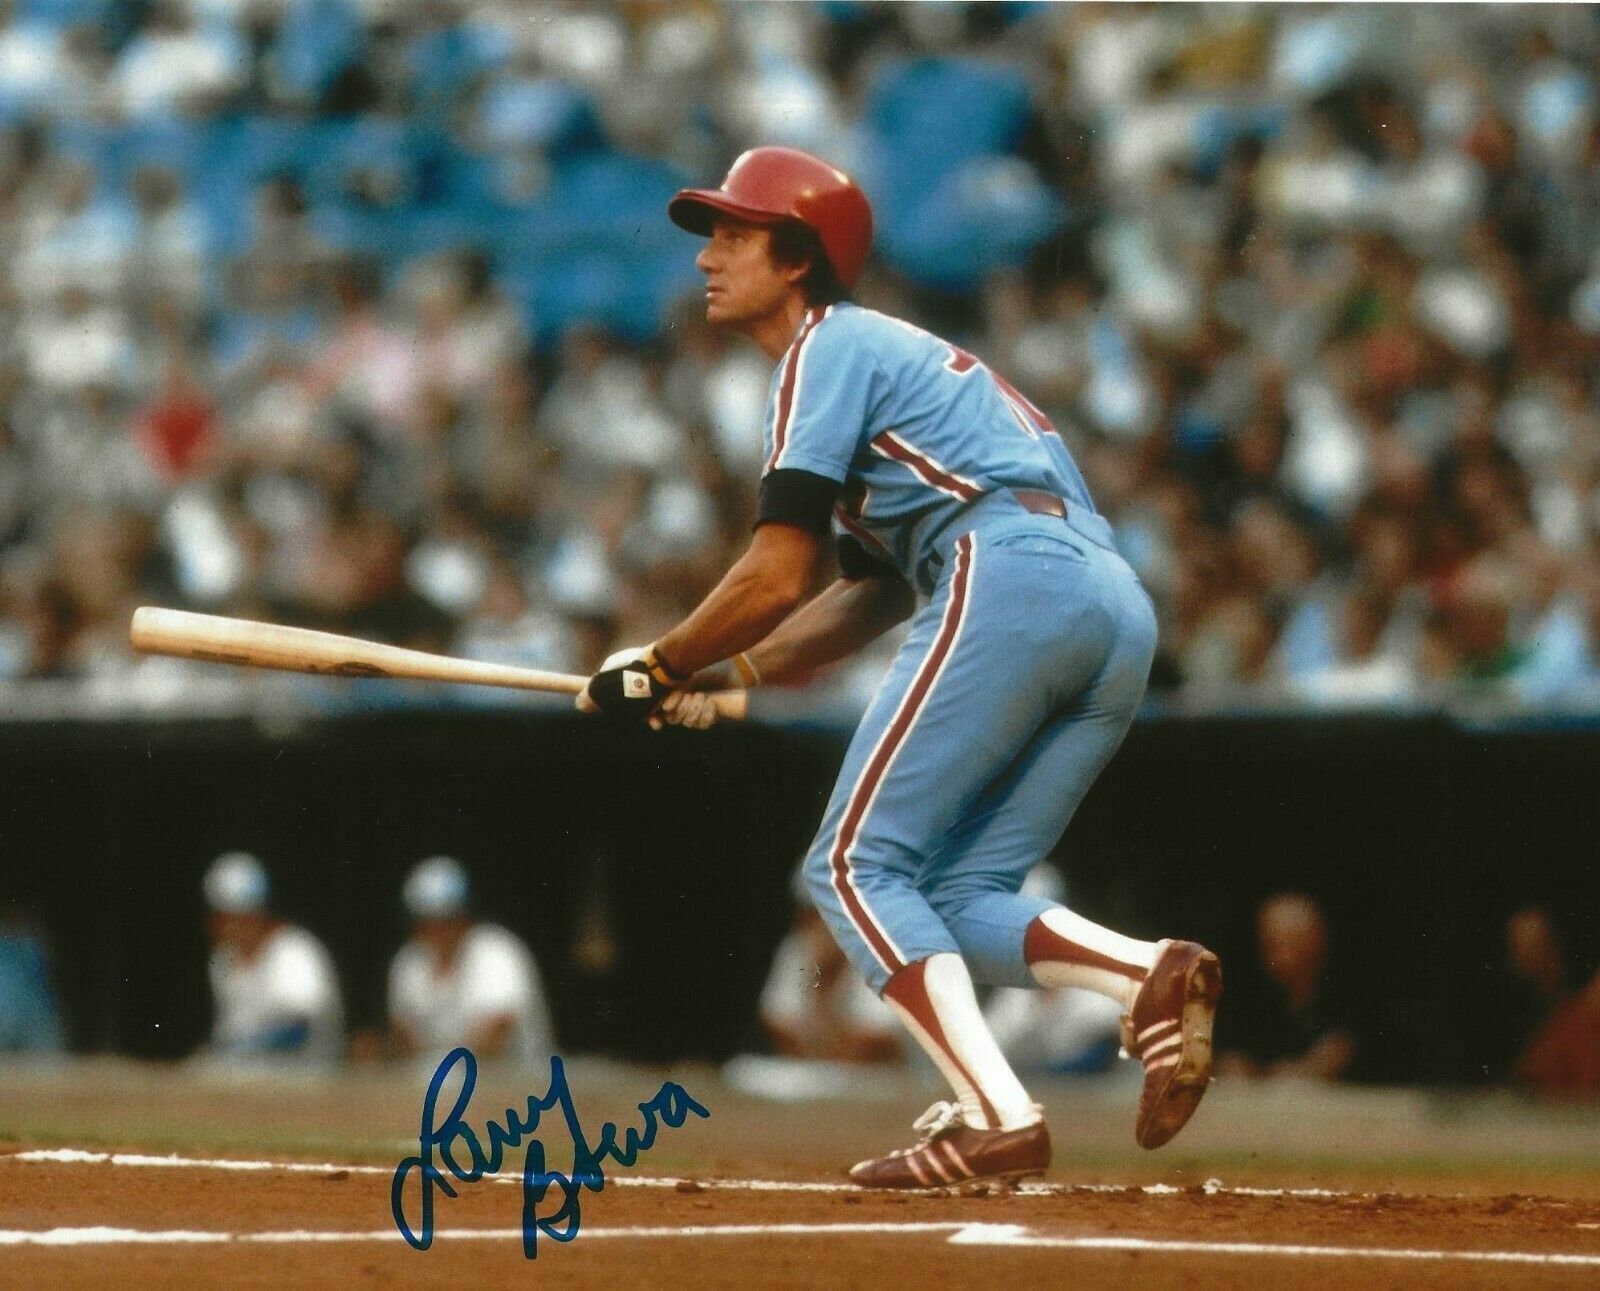 Larry Bowa Autographed Signed 8x10 Photo Poster painting ( Phillies ) REPRINT